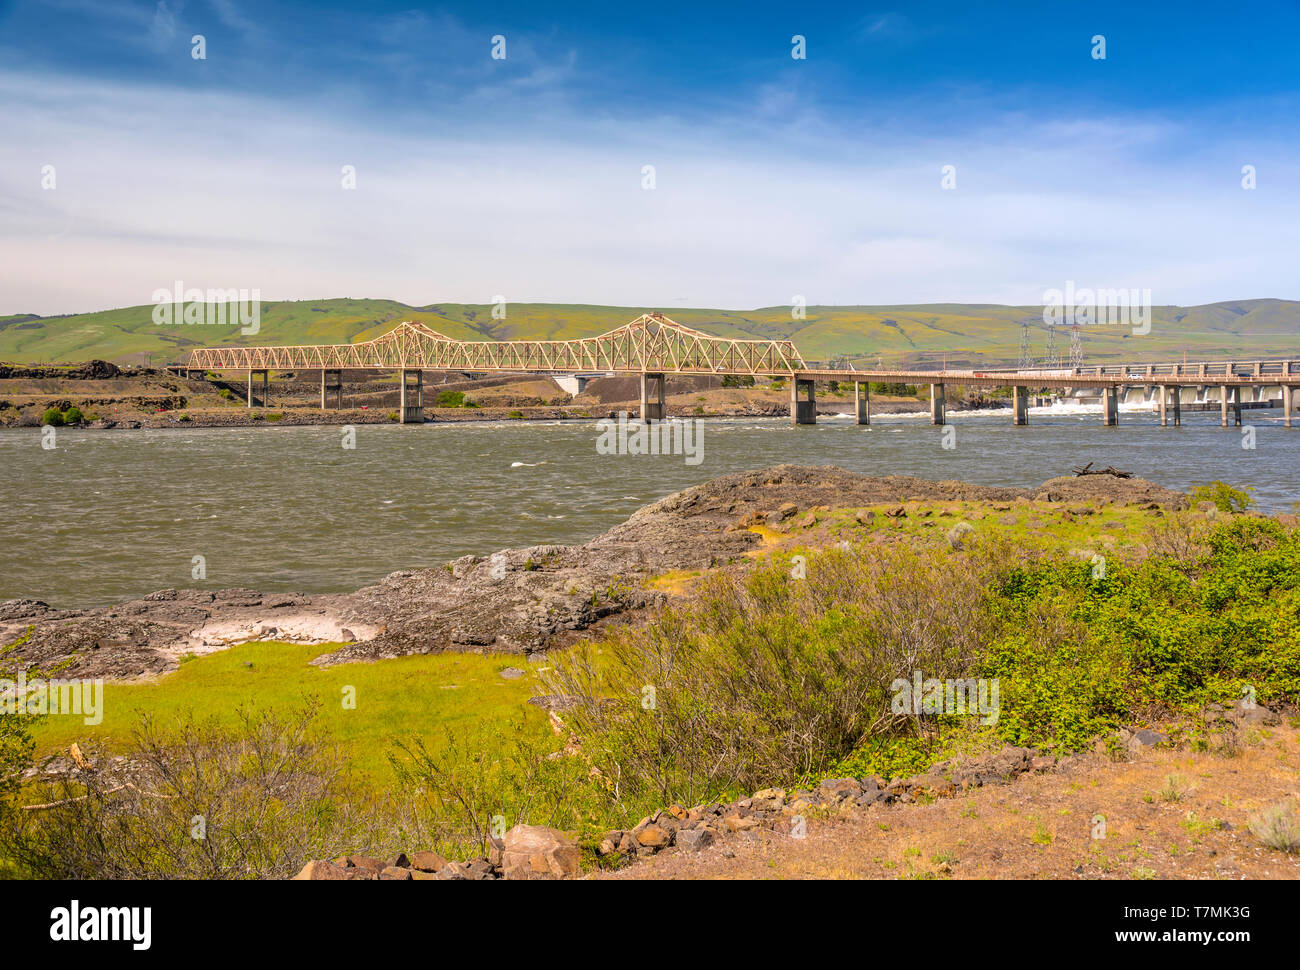 Bridge crossings and columbia river at the Dalles Oregon state. Stock Photo